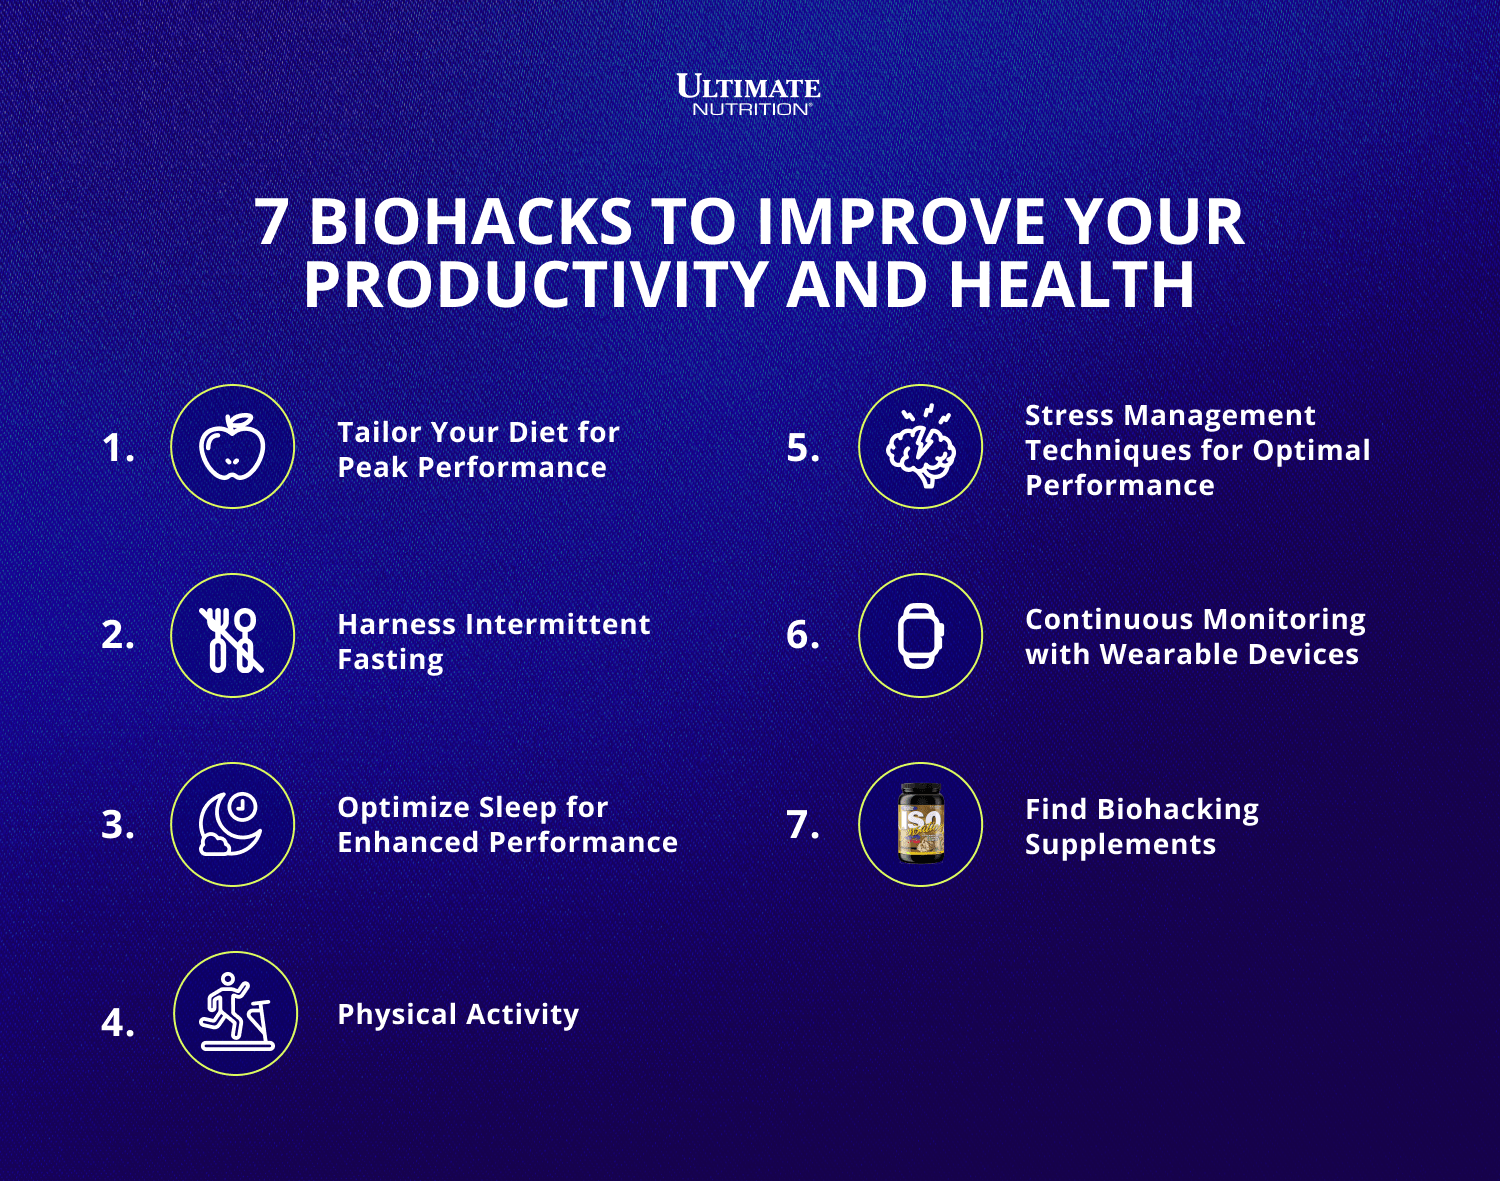 7 Biohacks to Improve Your Productivity and Health | Ultimate Nutrition